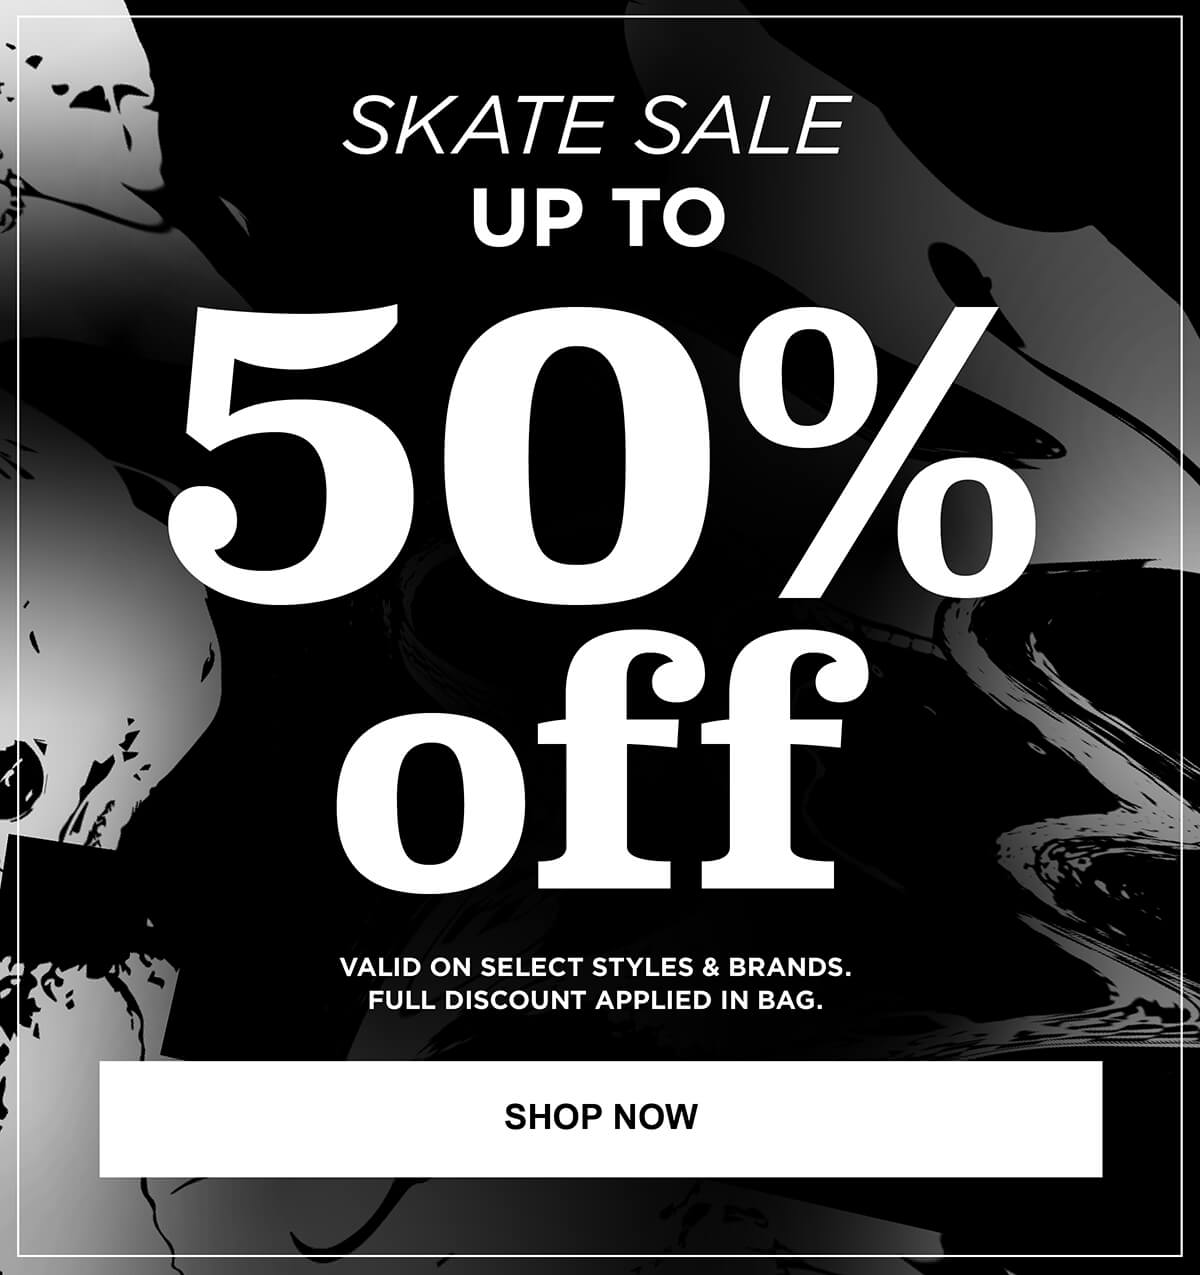 SKATE SALE - UP TO 50% OFF SNOW GEAR